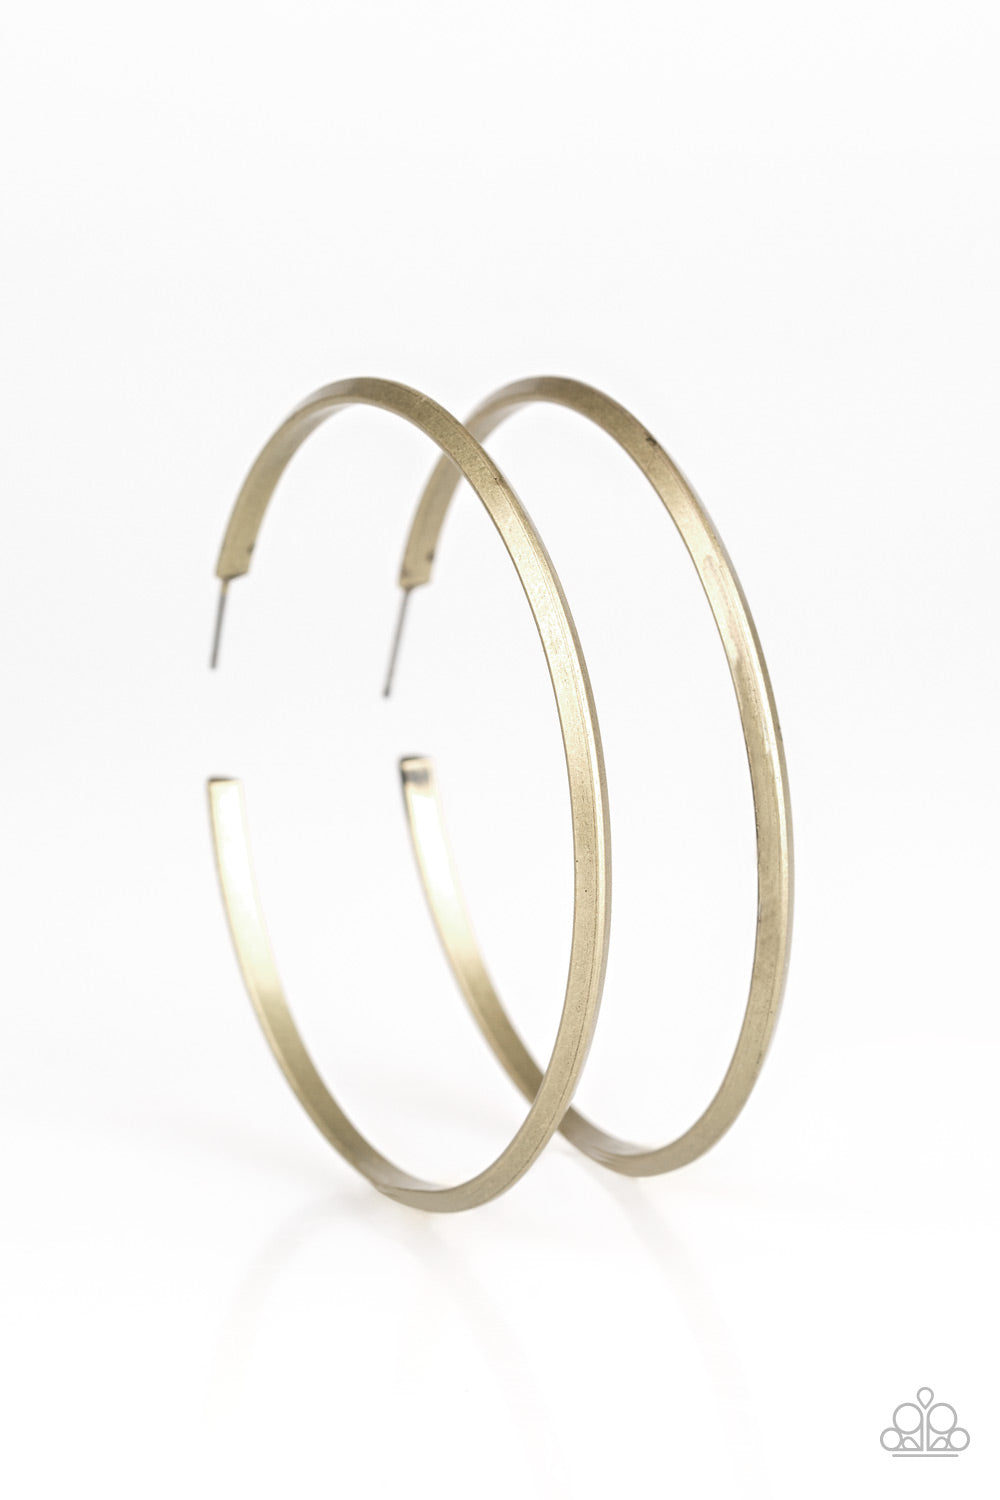 Brushed in an antiqued shimmer, a glistening brass bar curls into a sleek hoop for a classic look. Earring attaches to a standard post fitting. Hoop measures 2 1/2" in diameter.